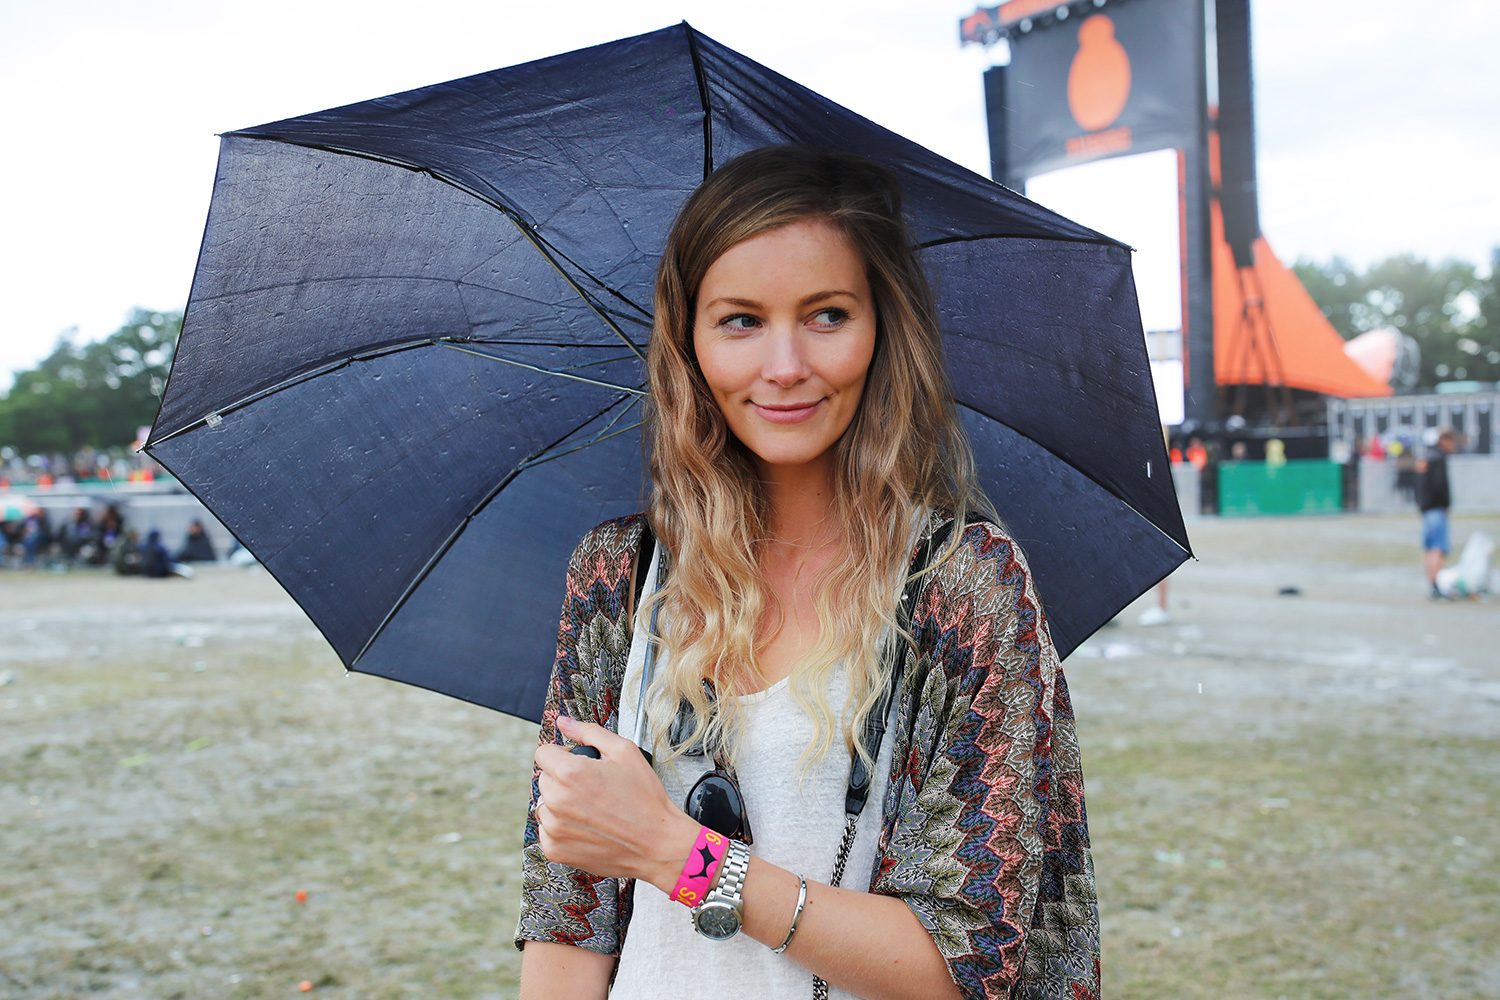 Our day at Roskilde Festival - Christina Dueholm